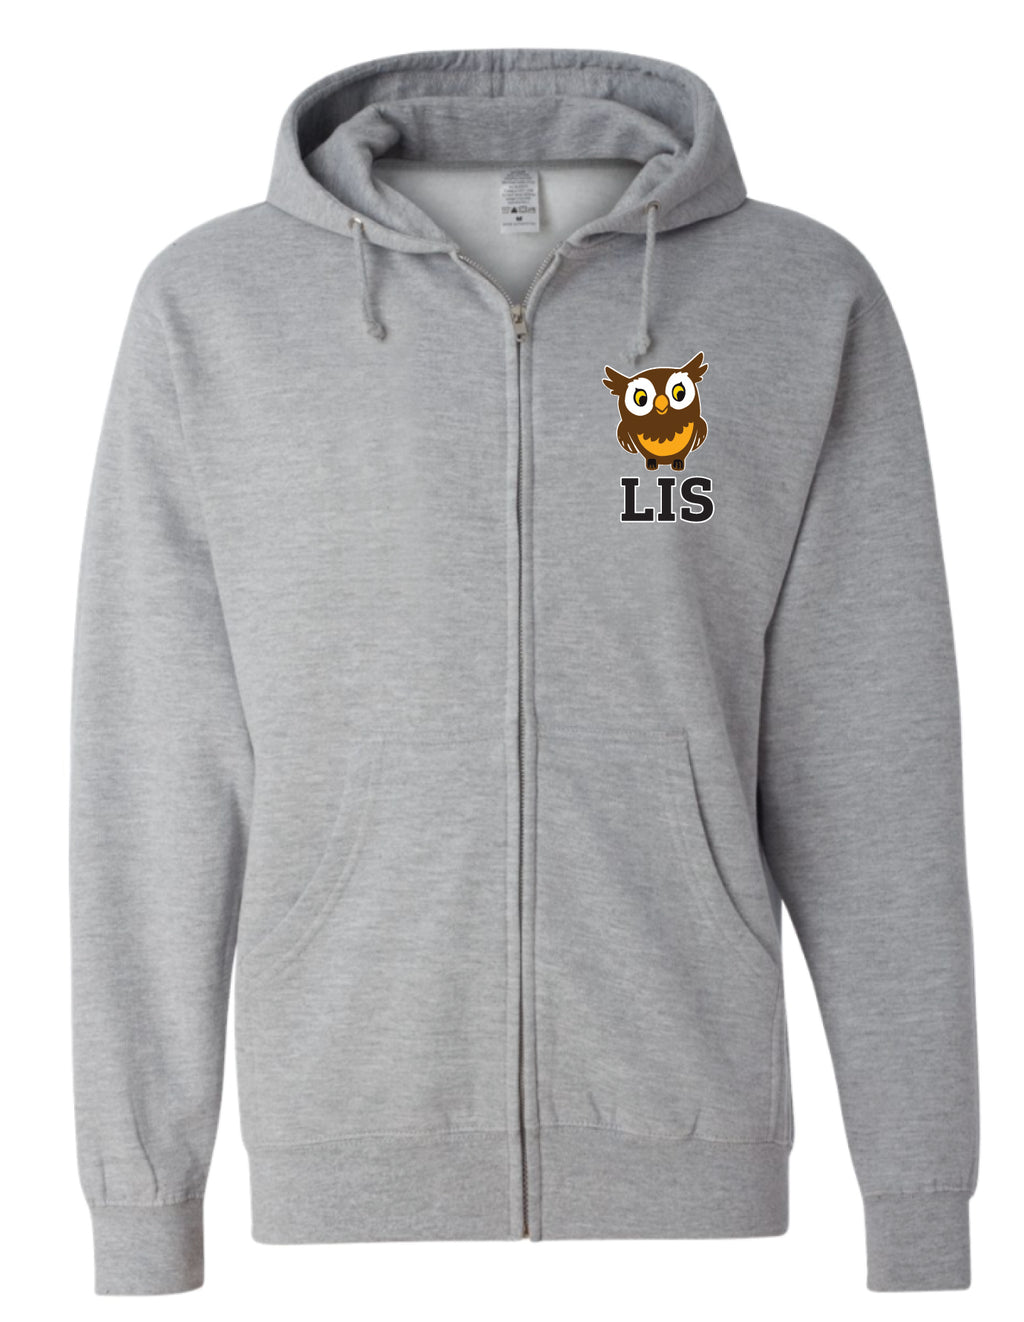 LIS Gray Full-Zip Owl Hoodie - Adult Unisex and Youth